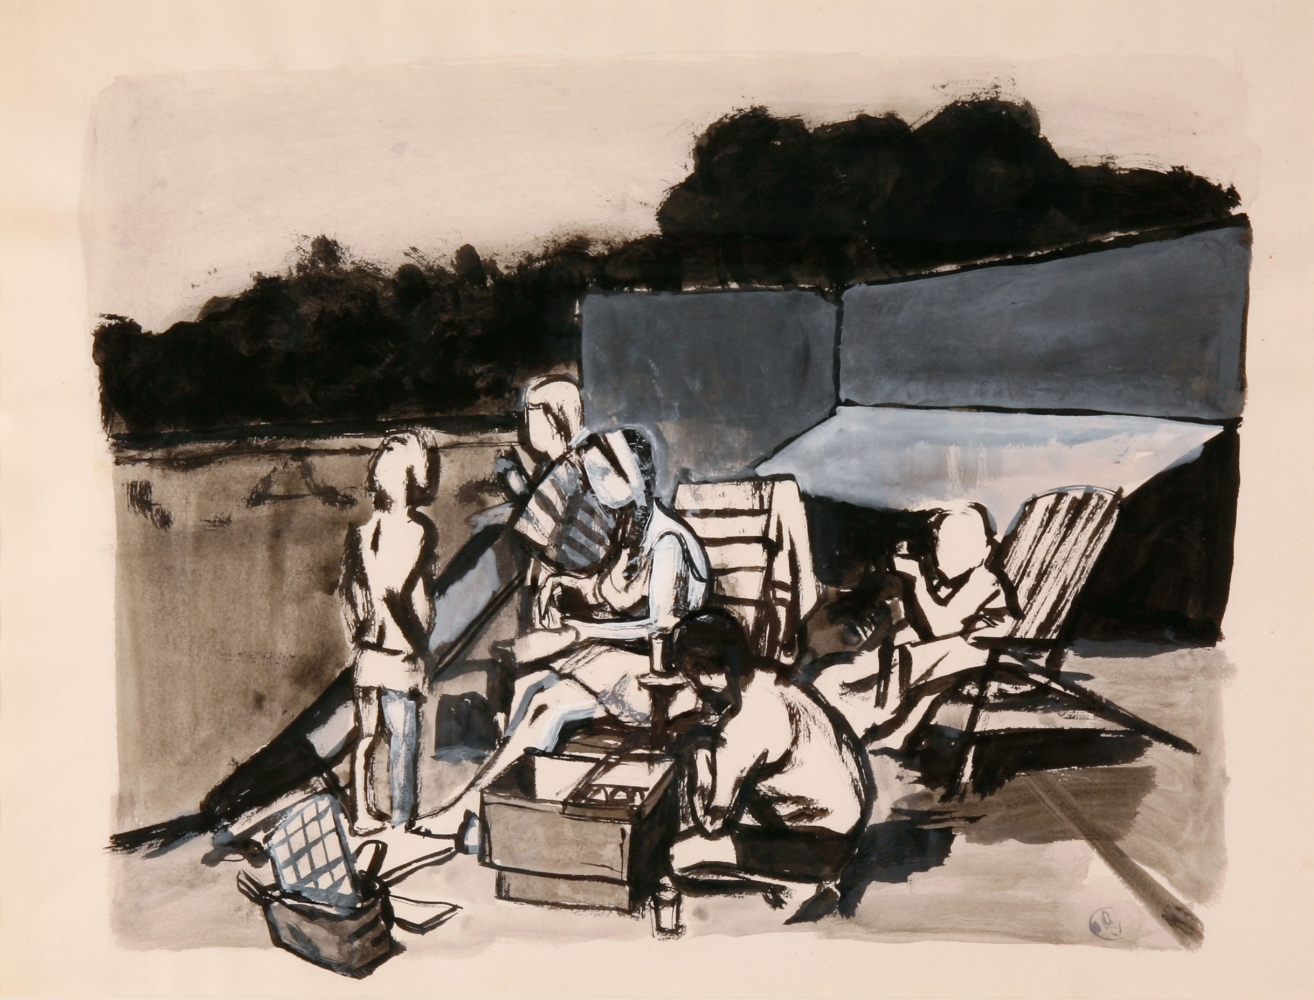 By The Pool III, c. 1968  18" x 24"  Brush And Ink And White Paint On Paper